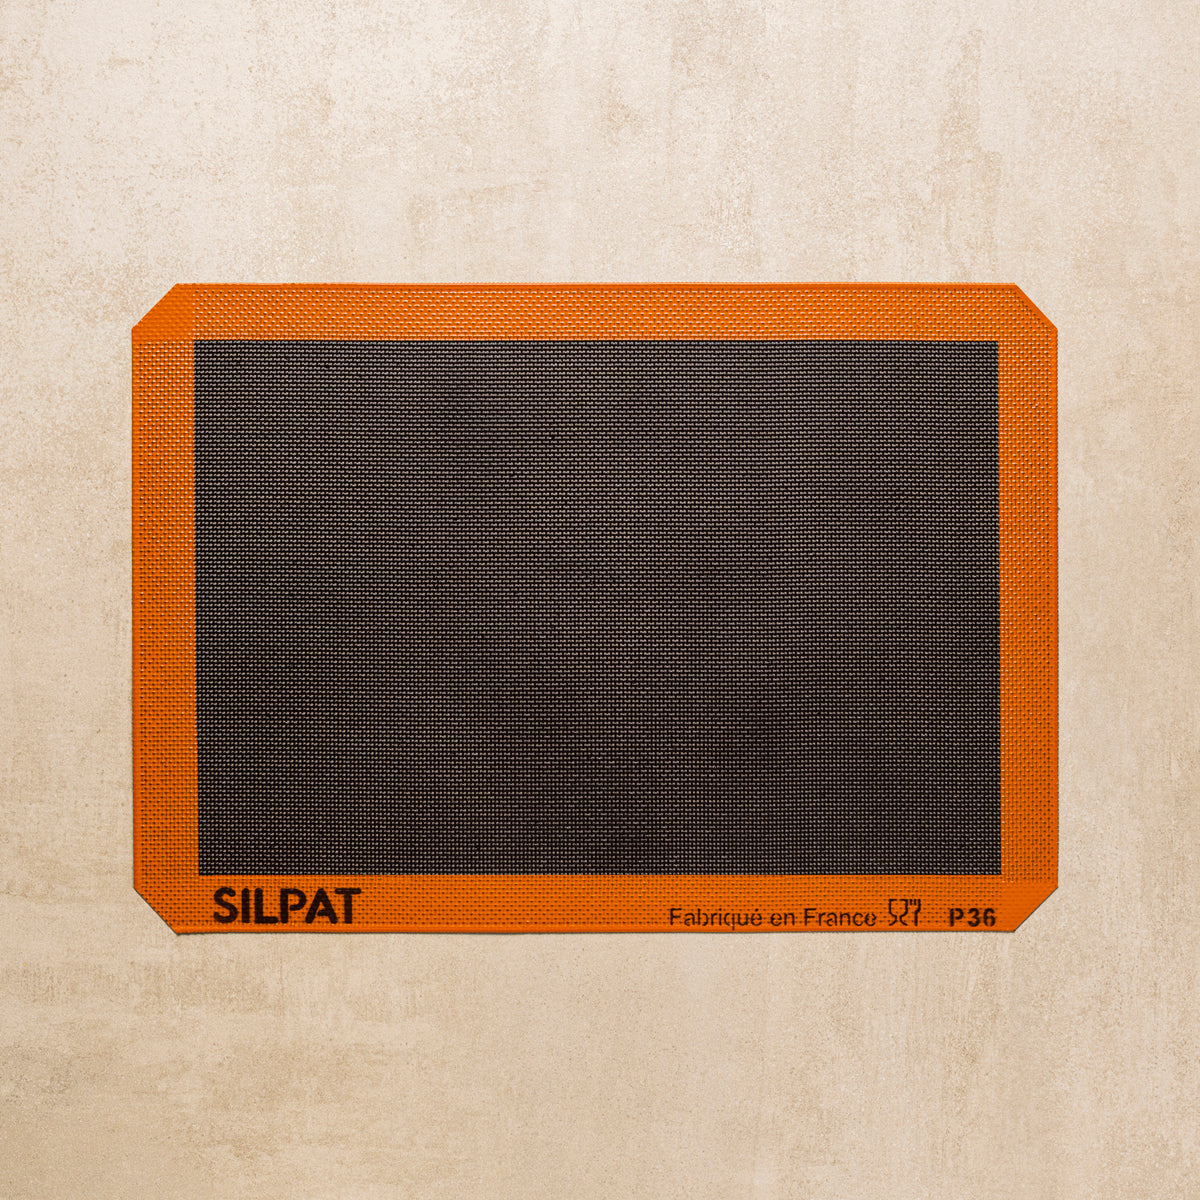 Use and Care for SILPAT products